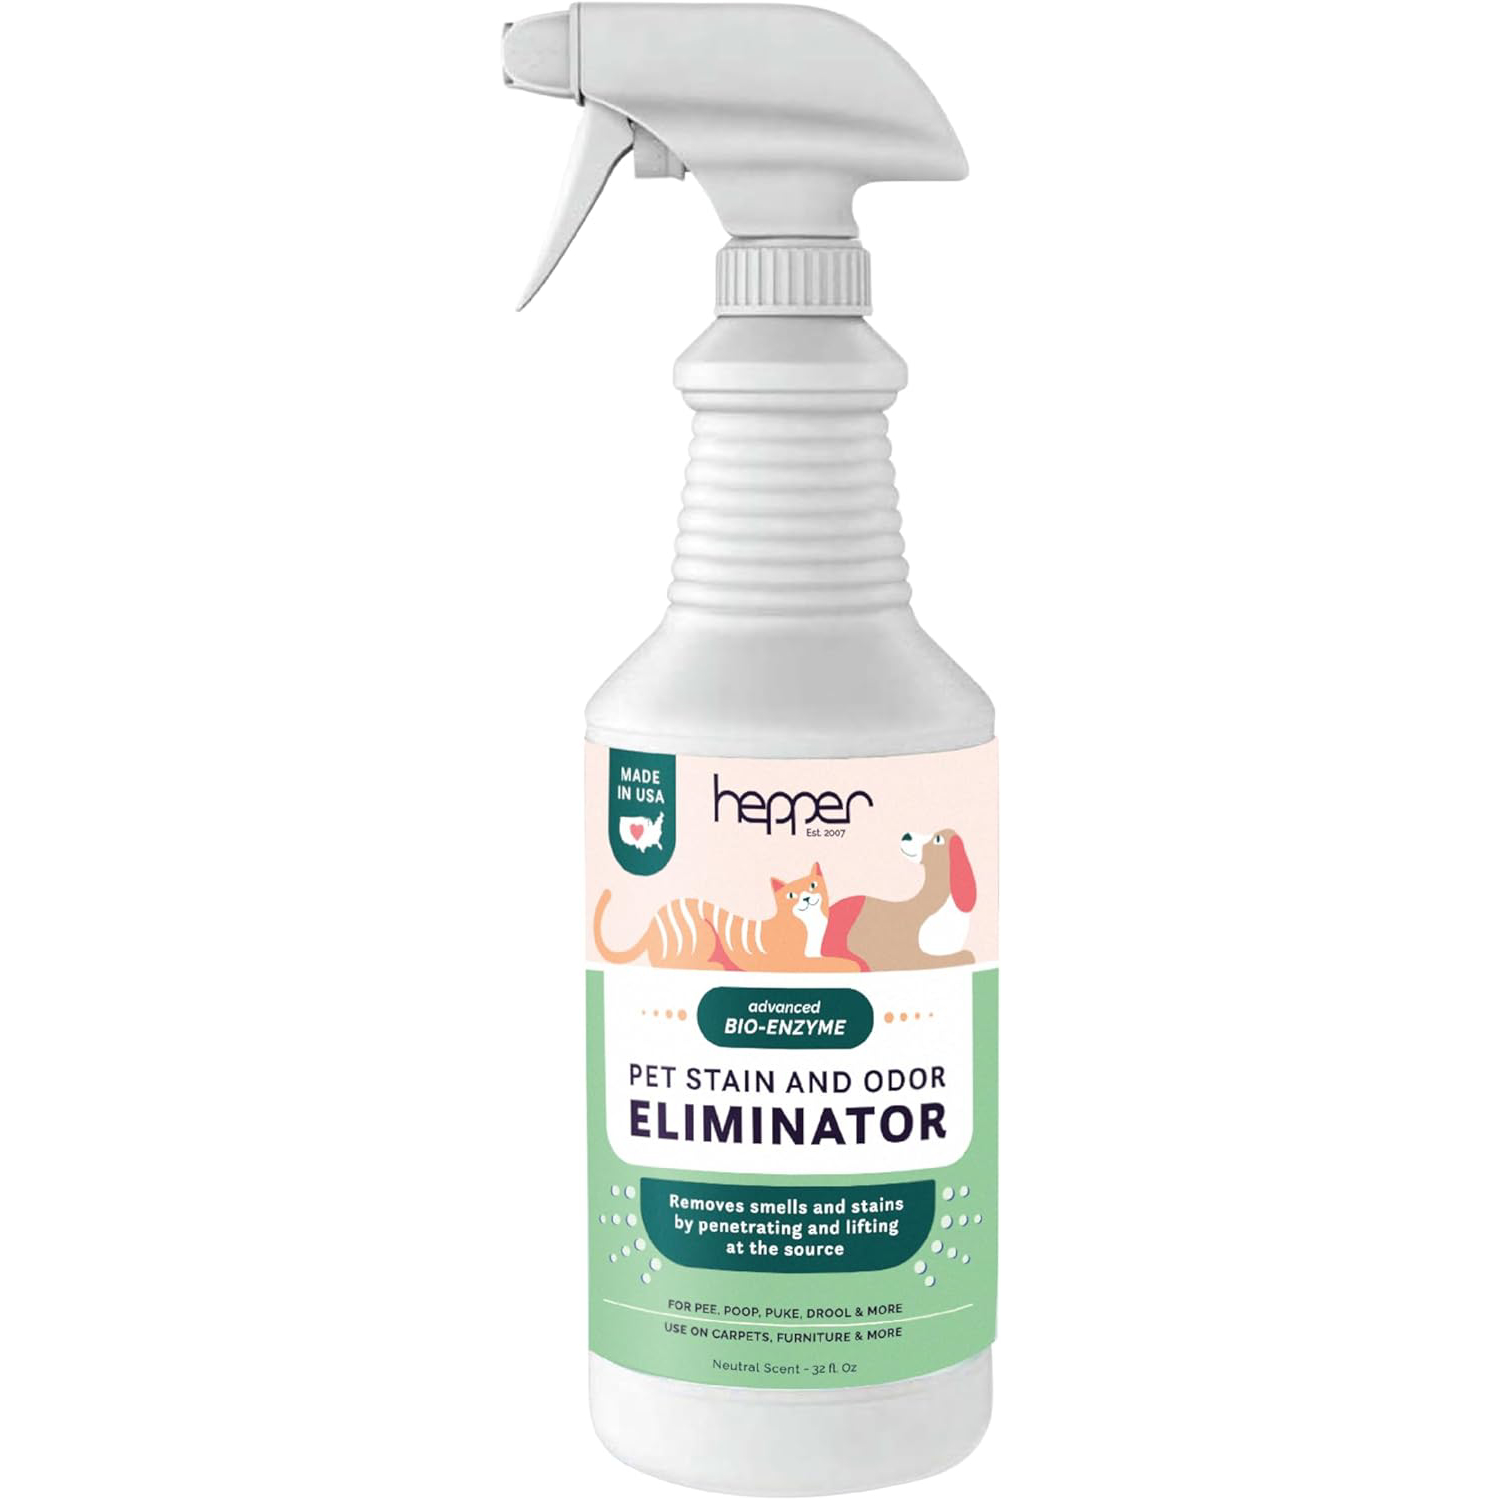 Hepper Advanced Bio Enzyme Pet Stain & Odor Eliminator Spray Smell Stain & Urine Remover for Cats New